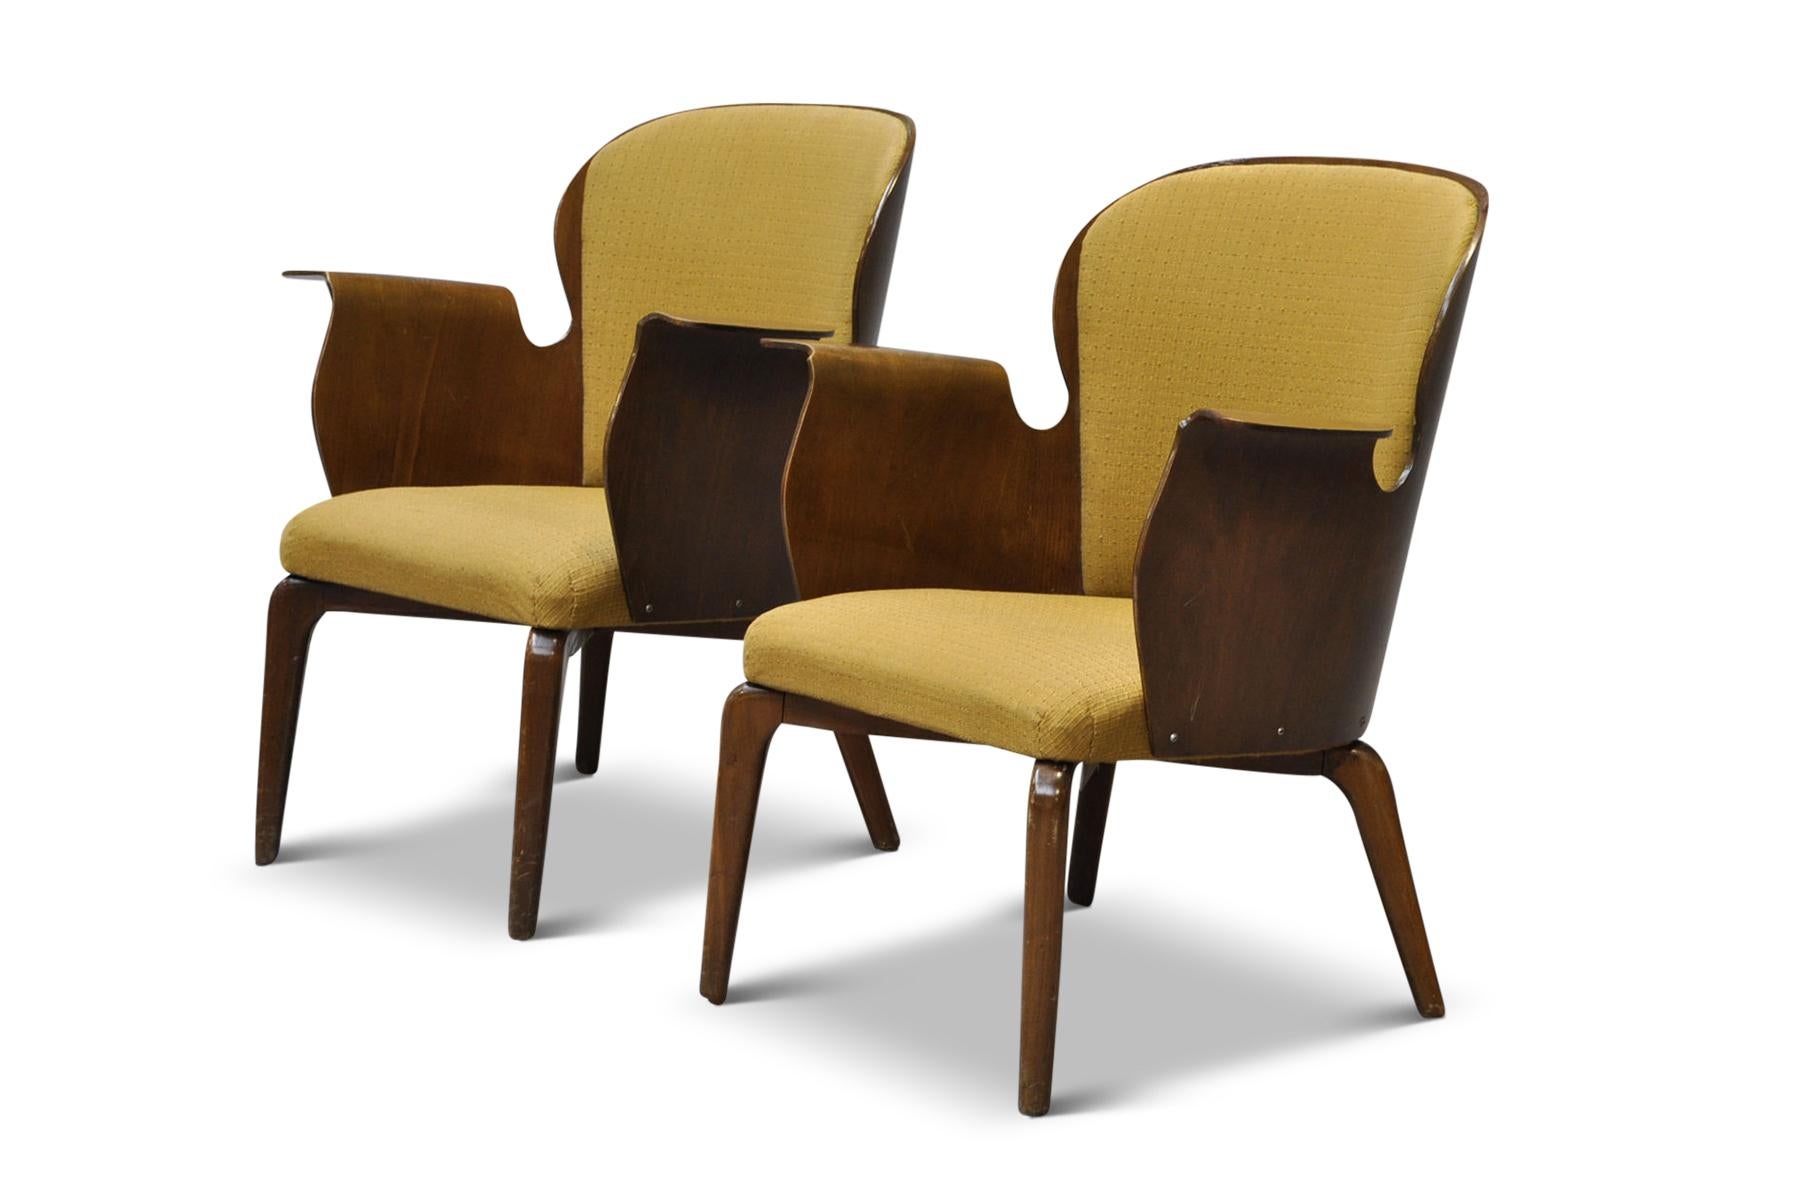 20th Century Pair of Danish Modern Bentwood 1950s Lounge Chairs by Hans Olsen